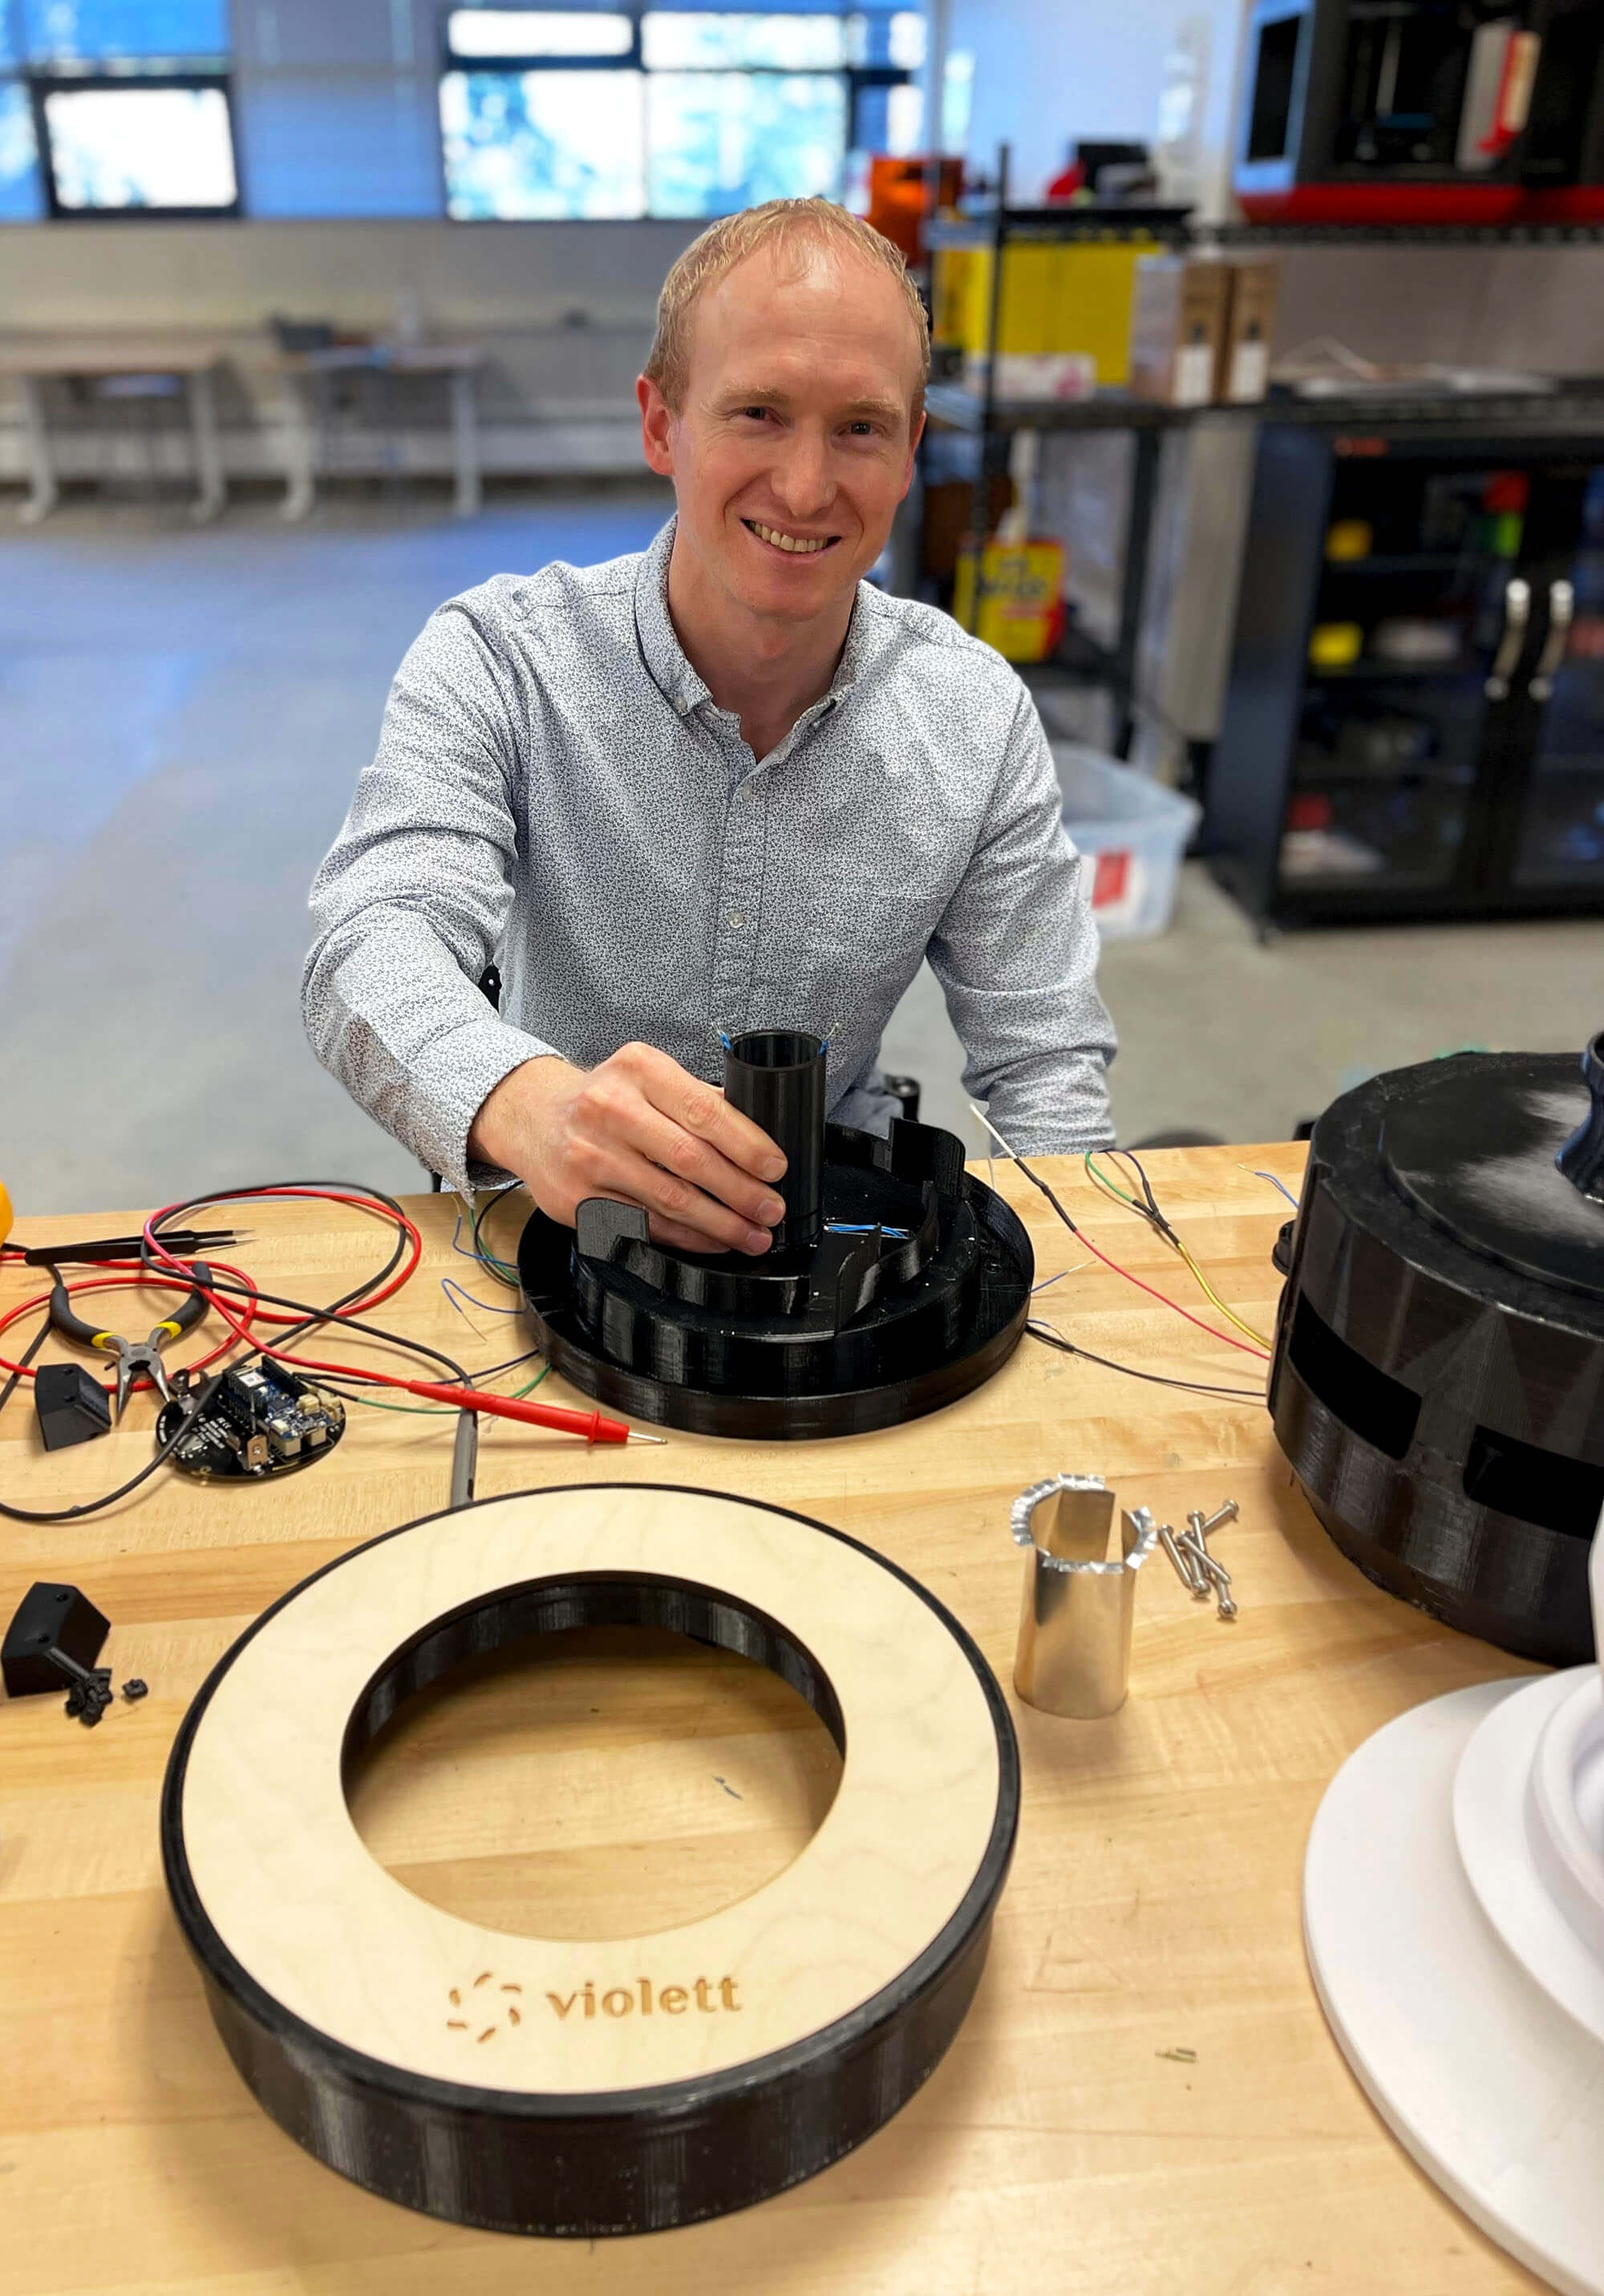 A man smiles as he sits at a work table with electrical components. 